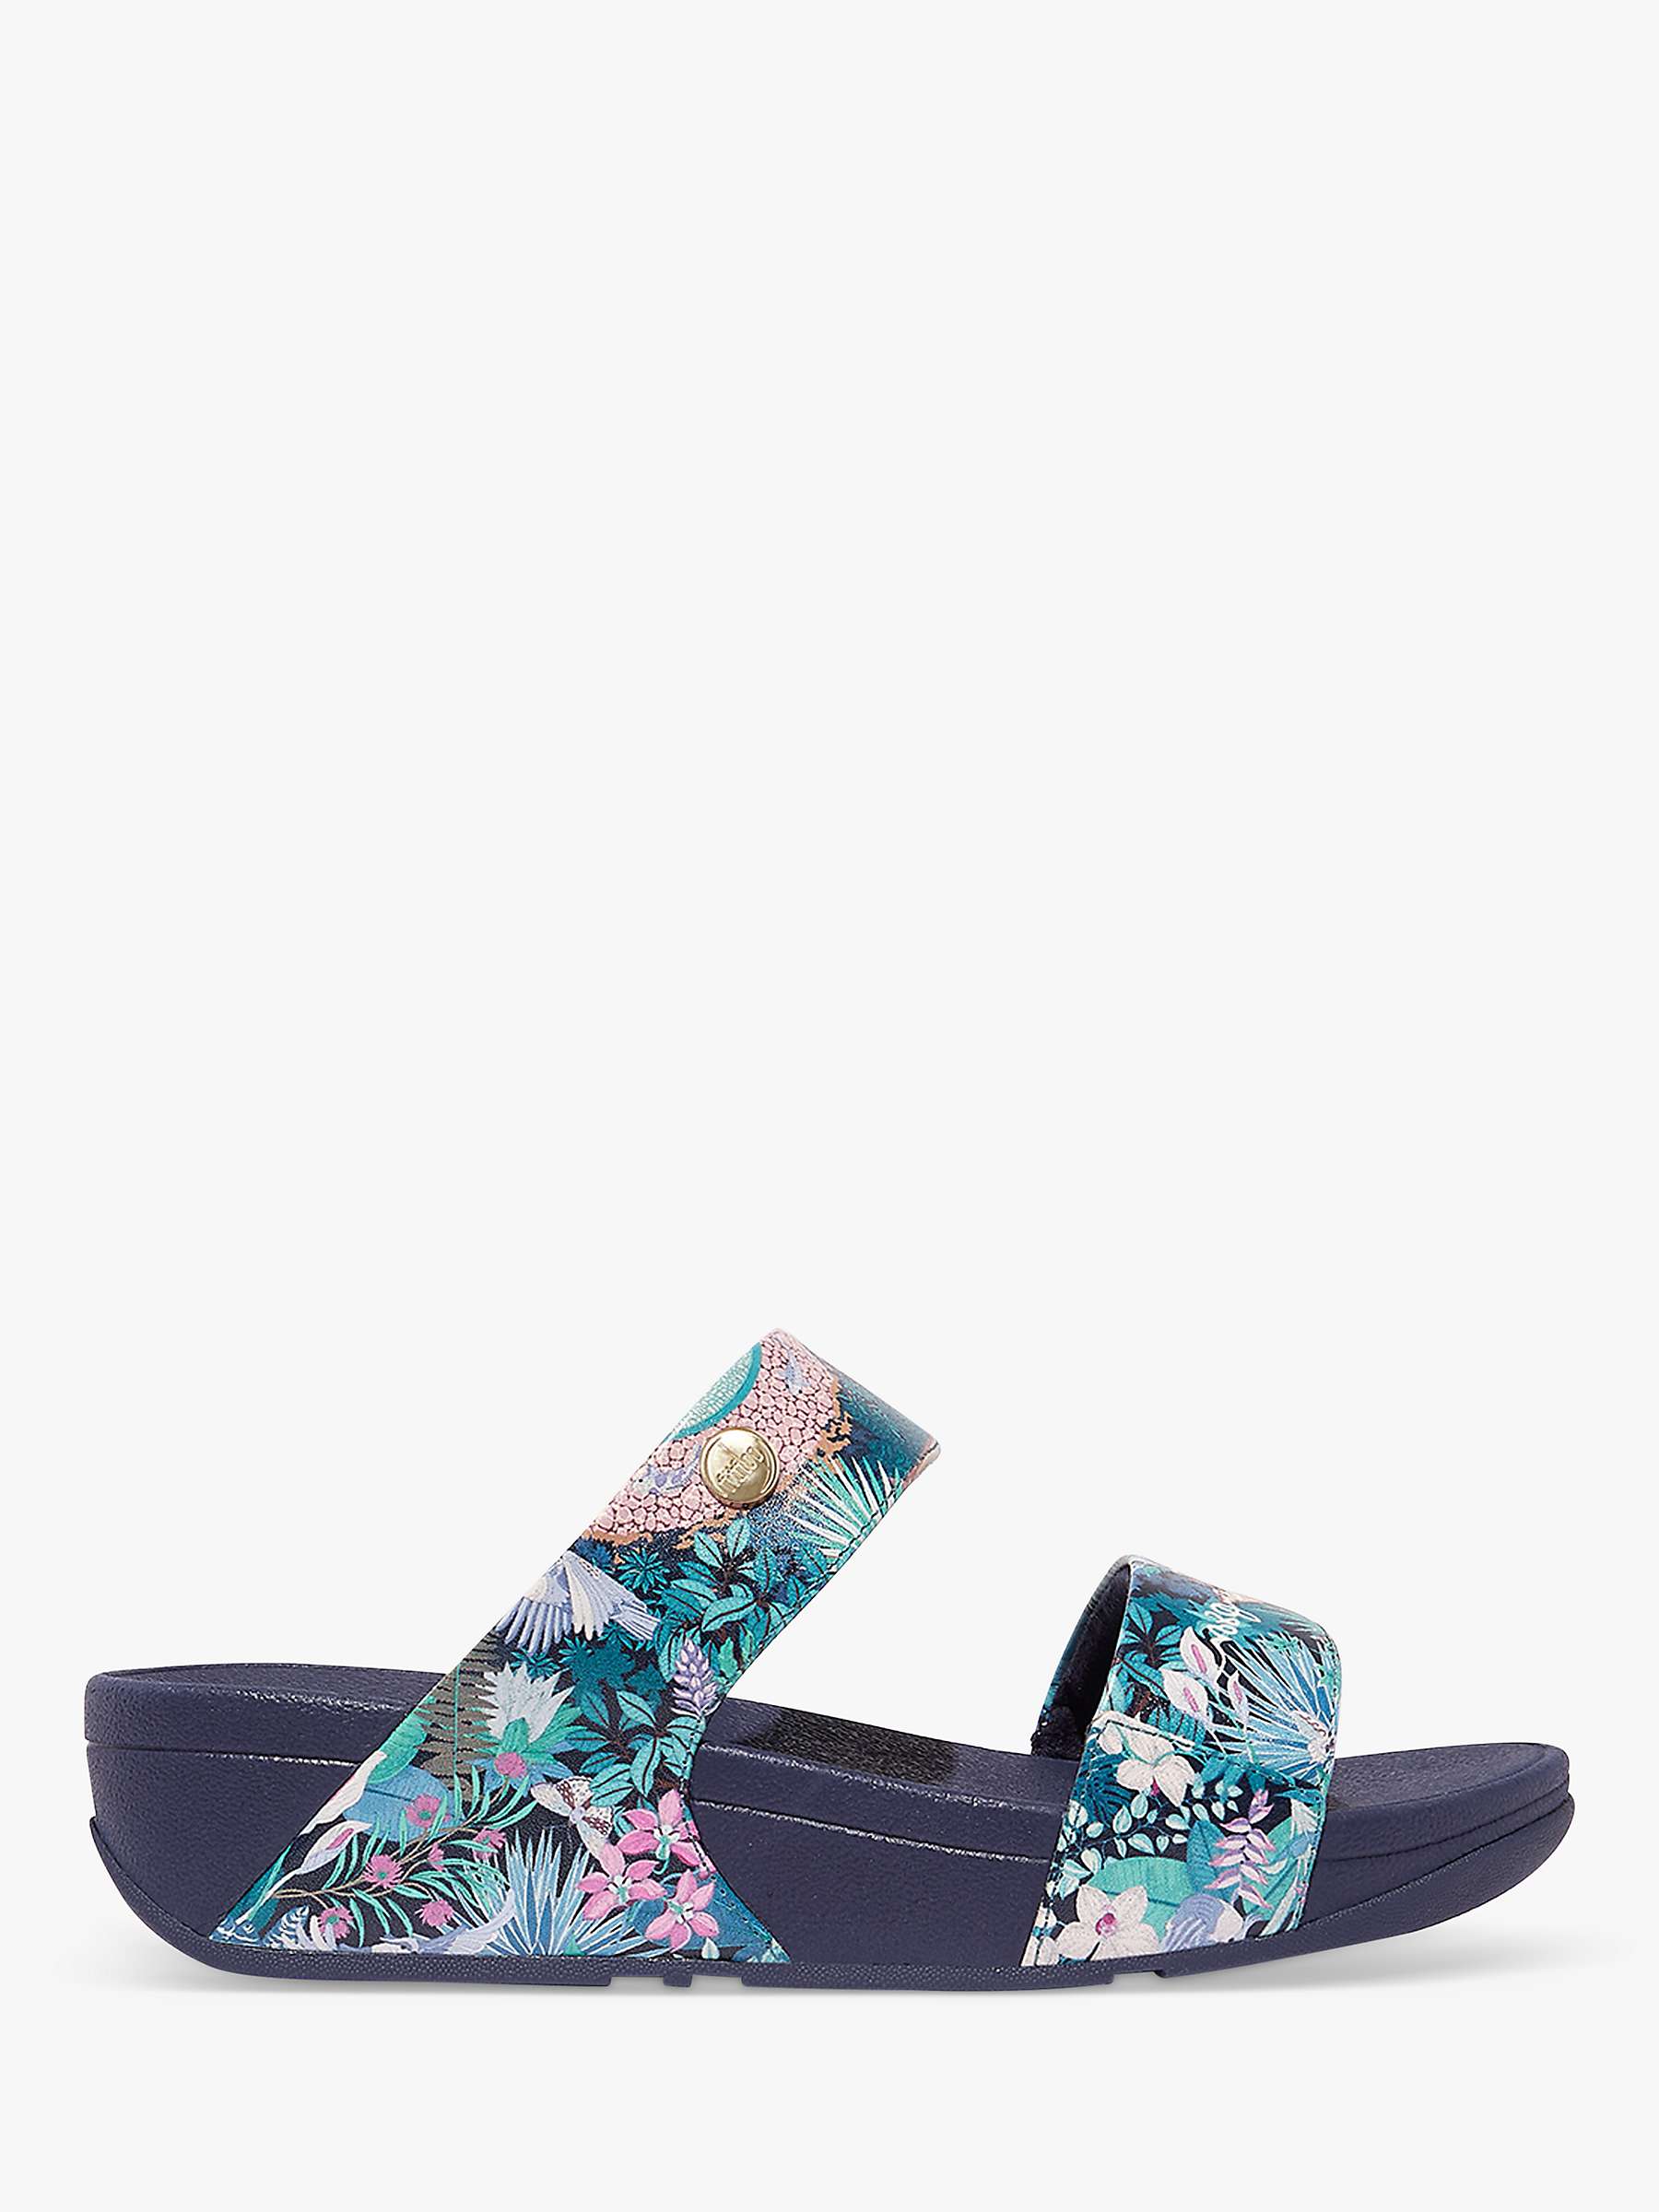 Buy FitFlop Jim Thompson Lulu Floral Leather Sandals Online at johnlewis.com